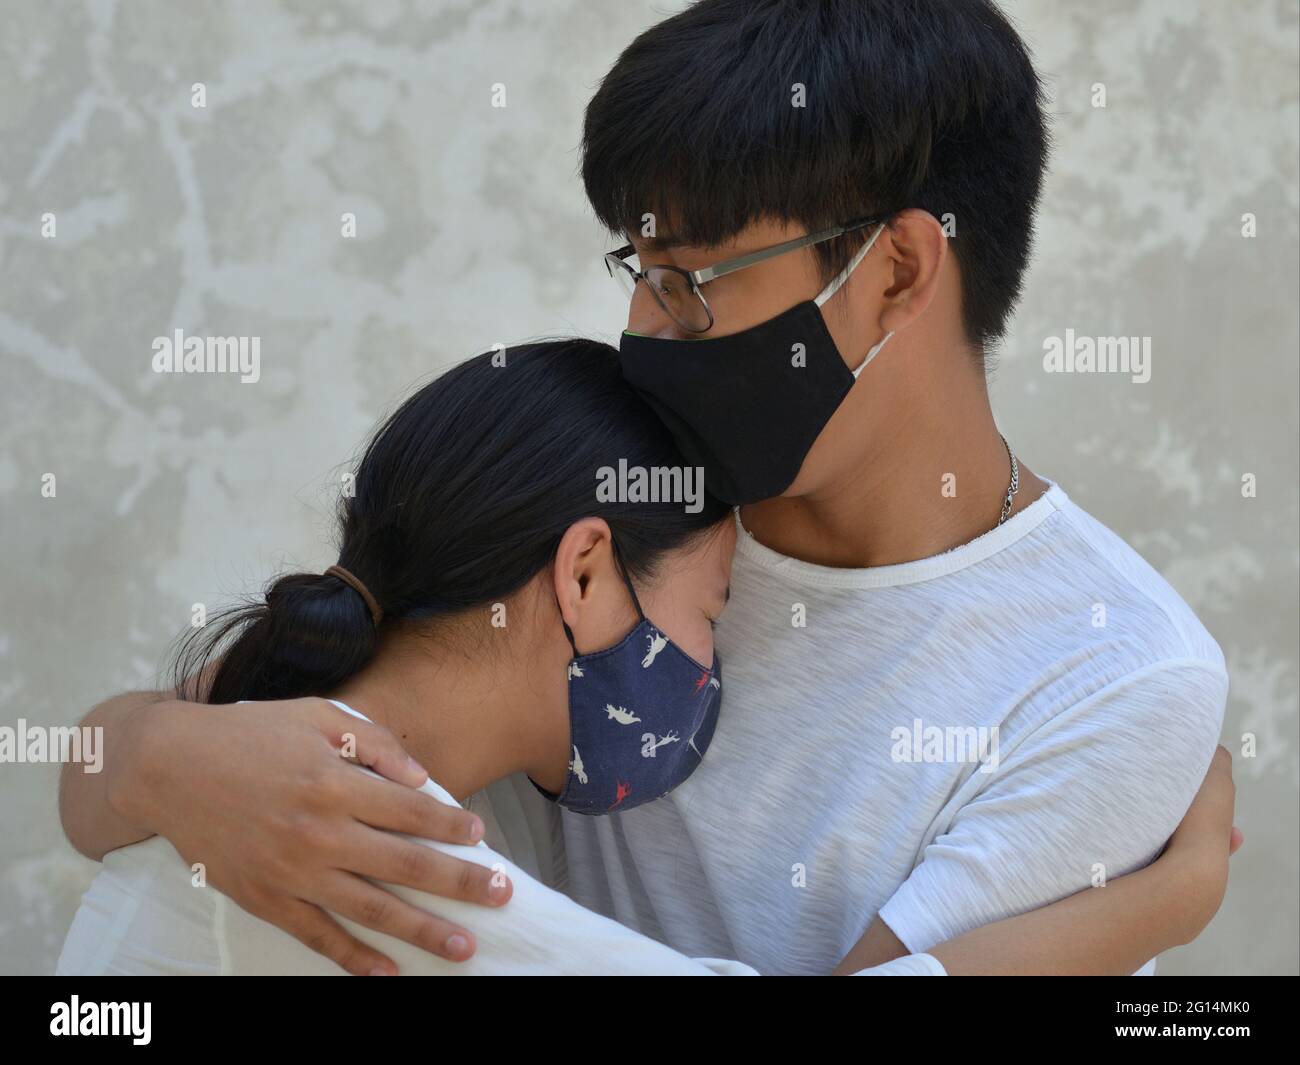 A pair of young lovers with dark cloth face masks are locked in a tender embrace during the global coronavirus pandemic. Stock Photo